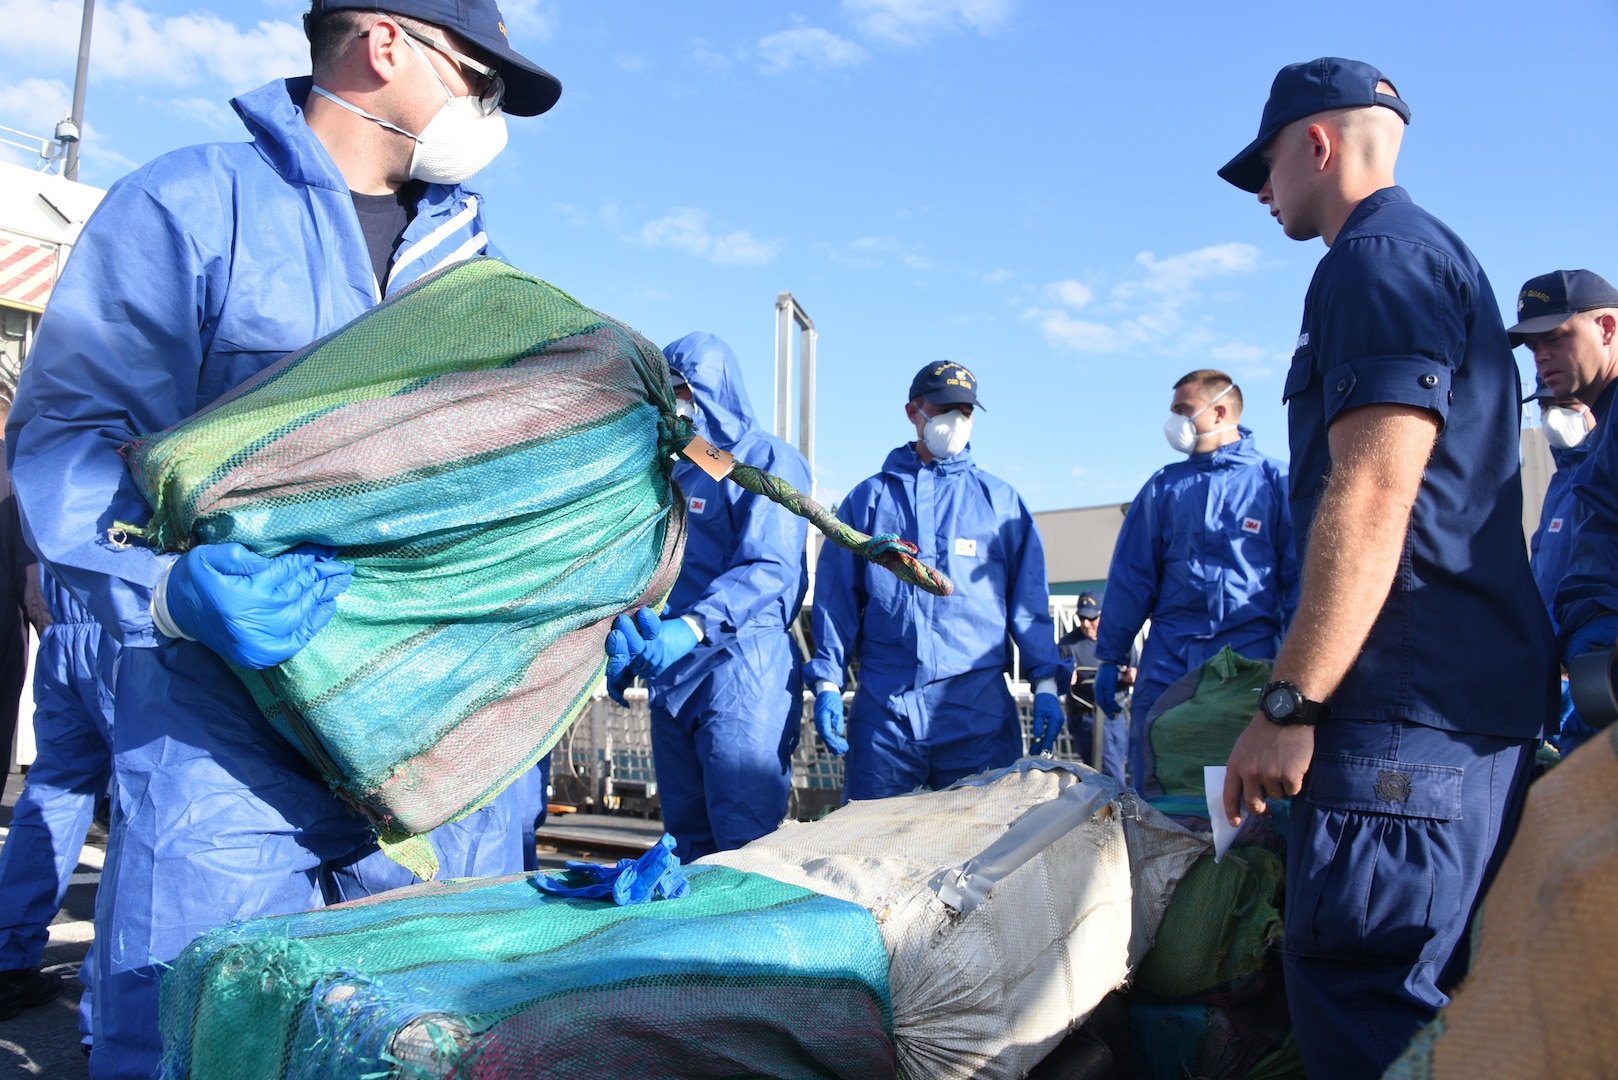 Coast Guard Cutter Bear (WMEC-901) crewmembers stage interdicted drugs on the flight deck of the cutter April 18, 2019 at Port Everglades, Florida.